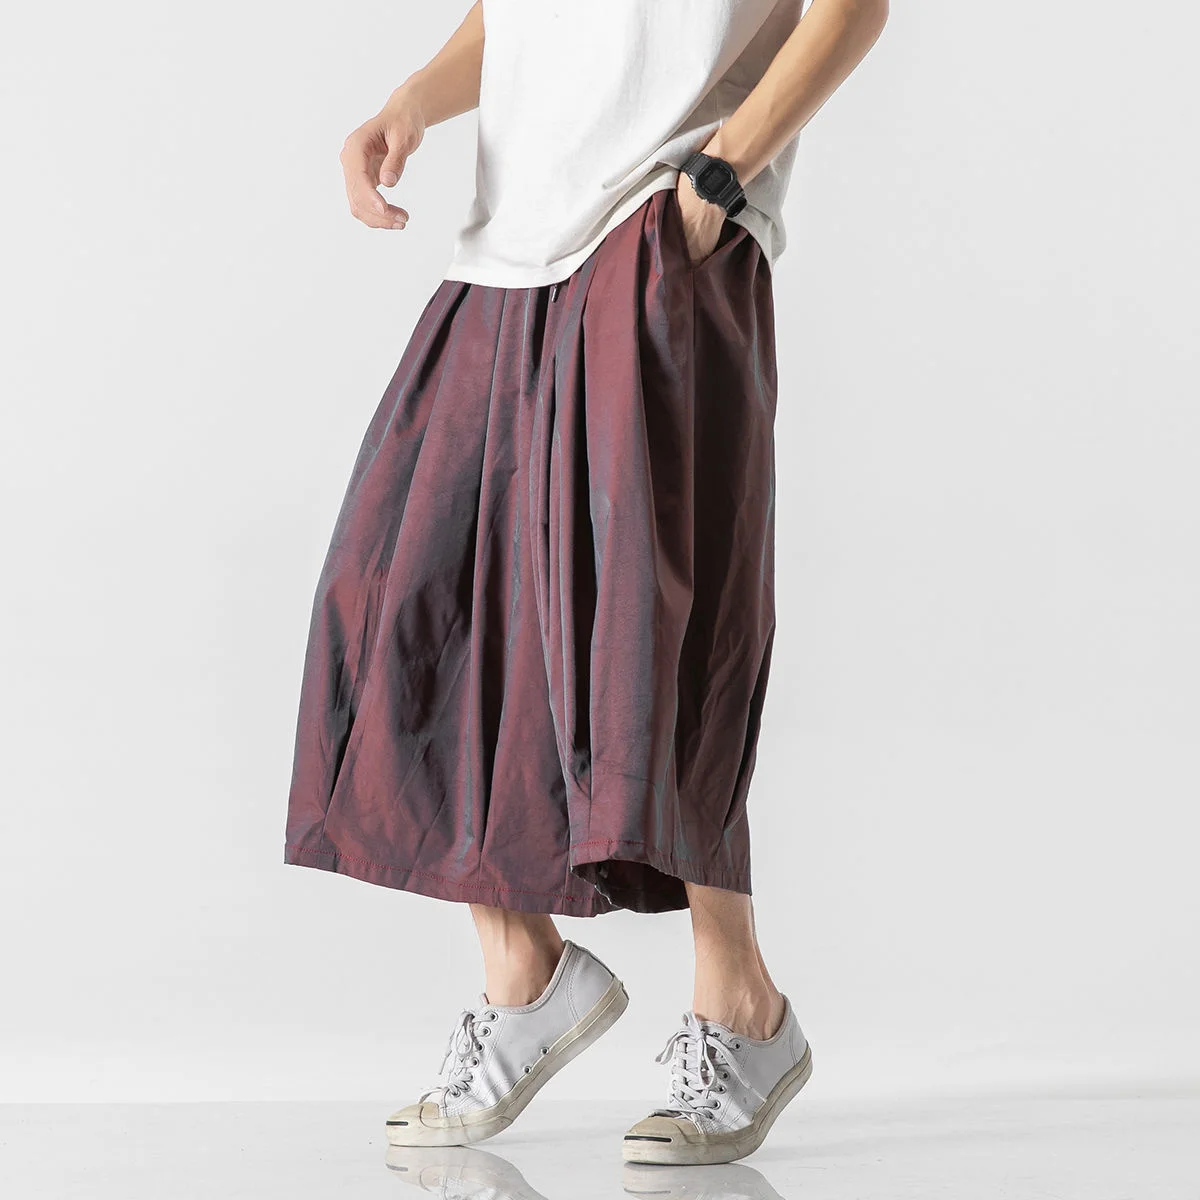 MrGB Summer Reflective Men Cropped Pants Oversized Baggy Chinese Style Gothic Male Elastic Waist Wide Leg Pants Casual Trousers